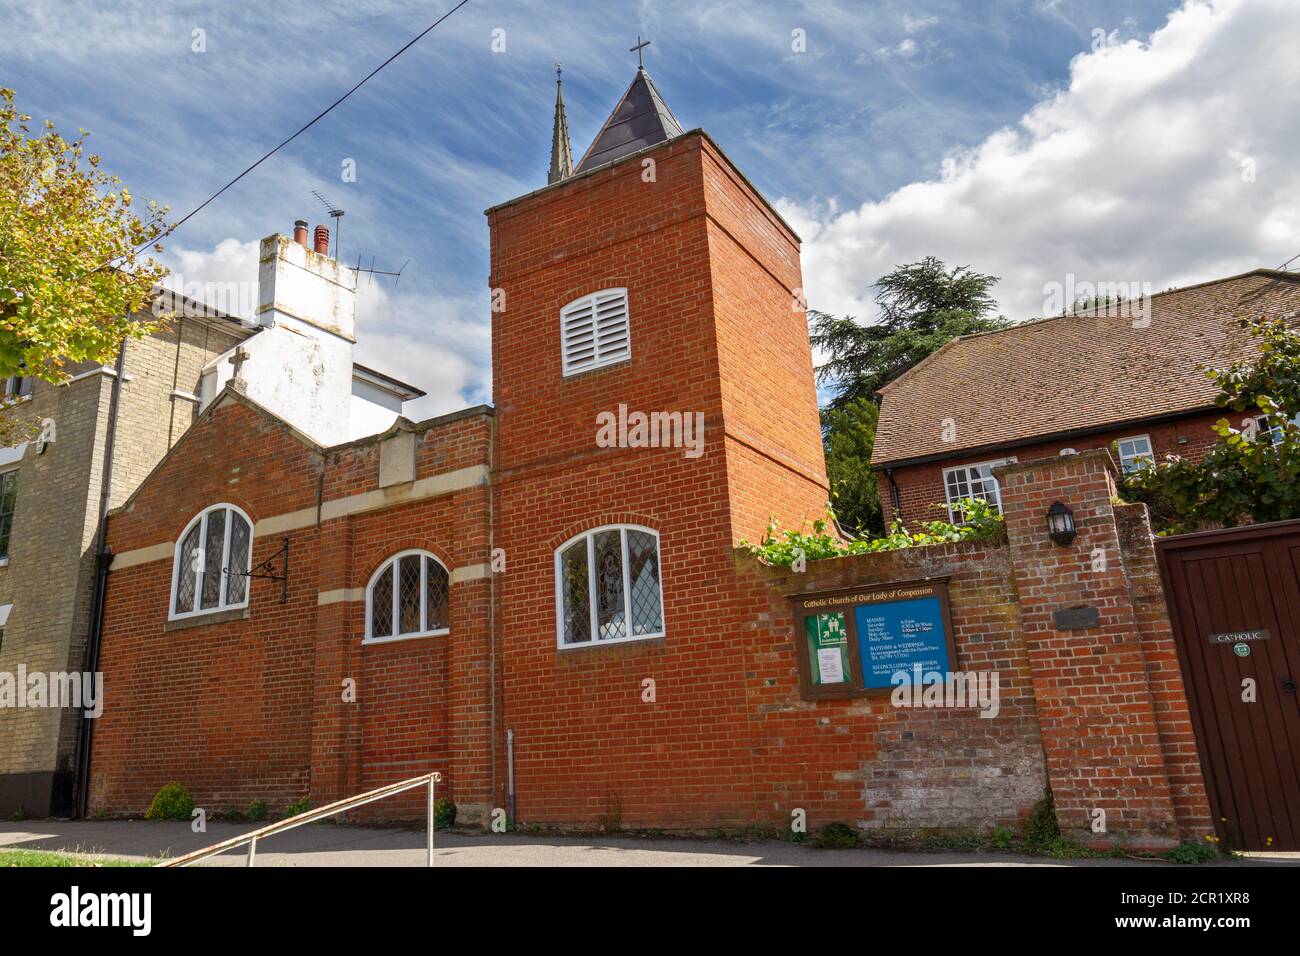 The Catholic Church of Our Lady of Compassion on Castle Street, Saffron Walden, Essex, UK. Stock Photo